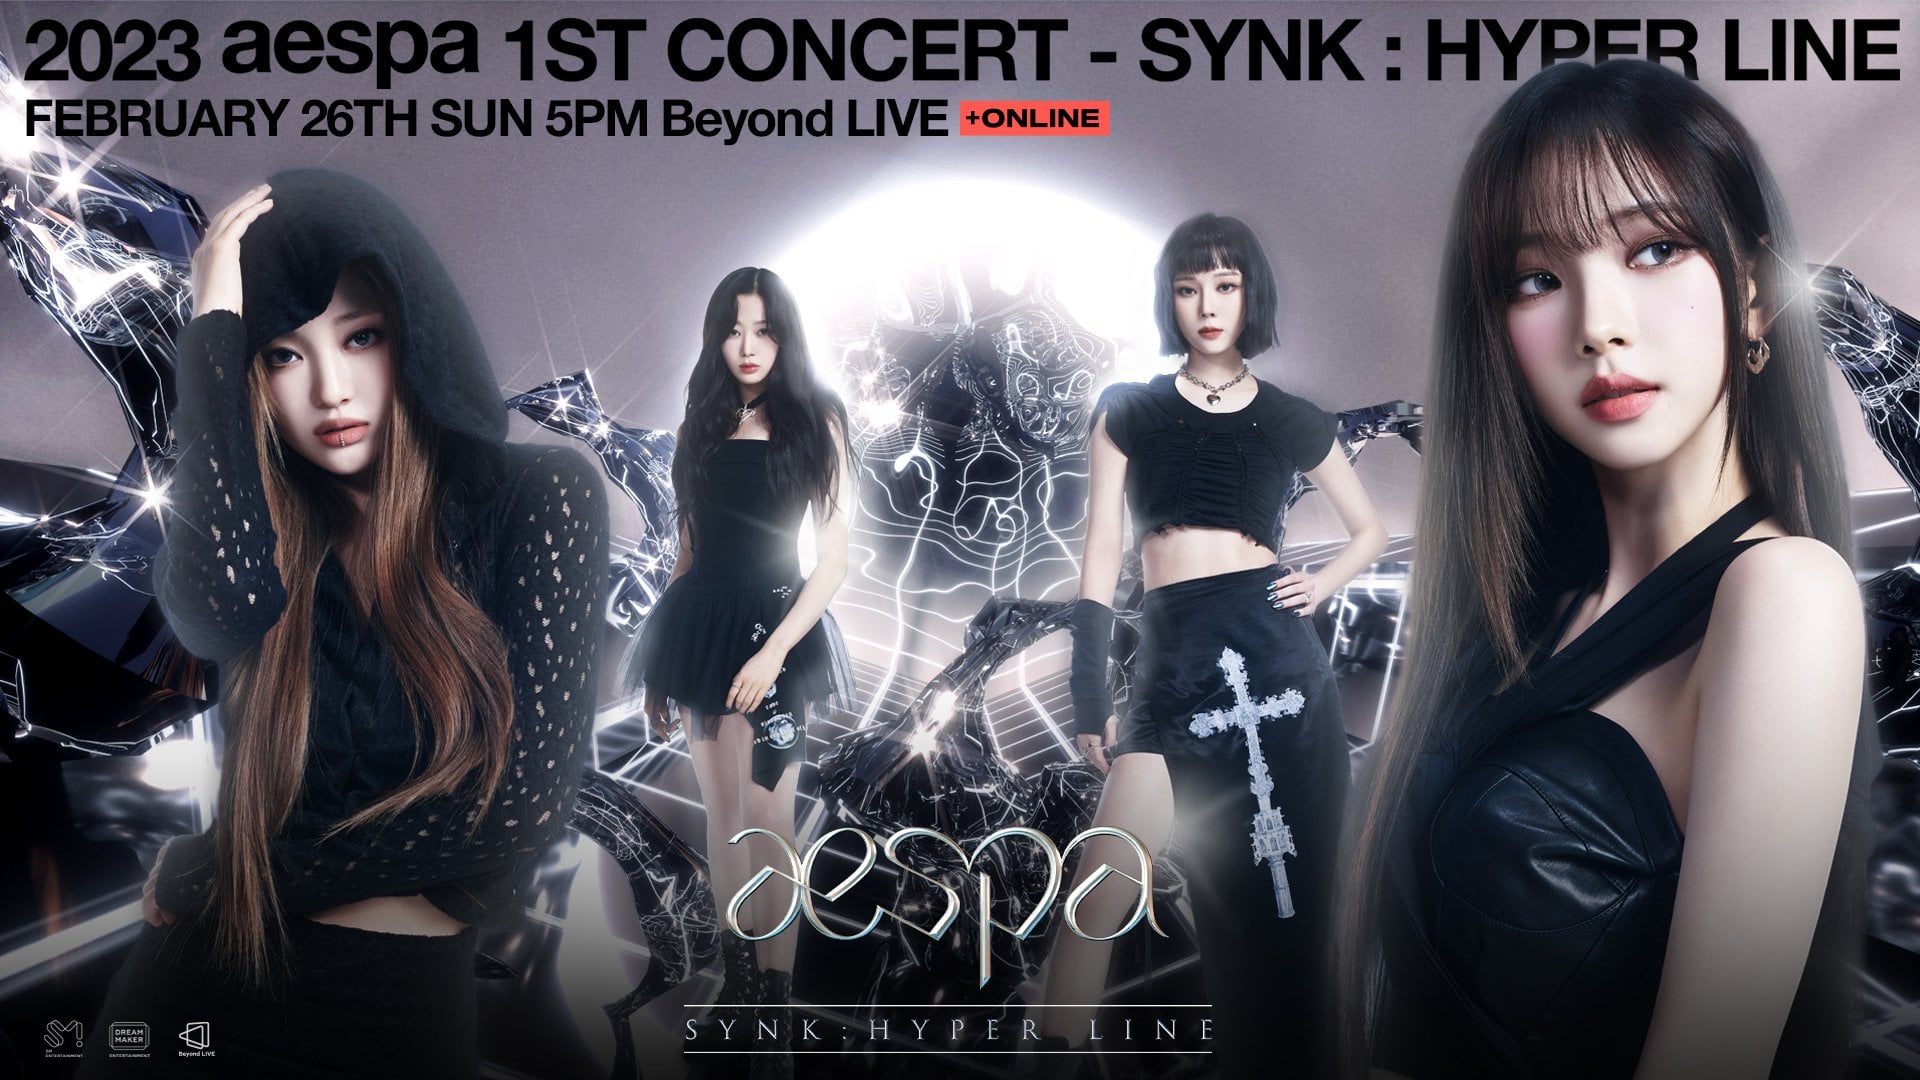 Will aespa SYNK: HYPERLINE have a VOD available for purchase after the official concert date?